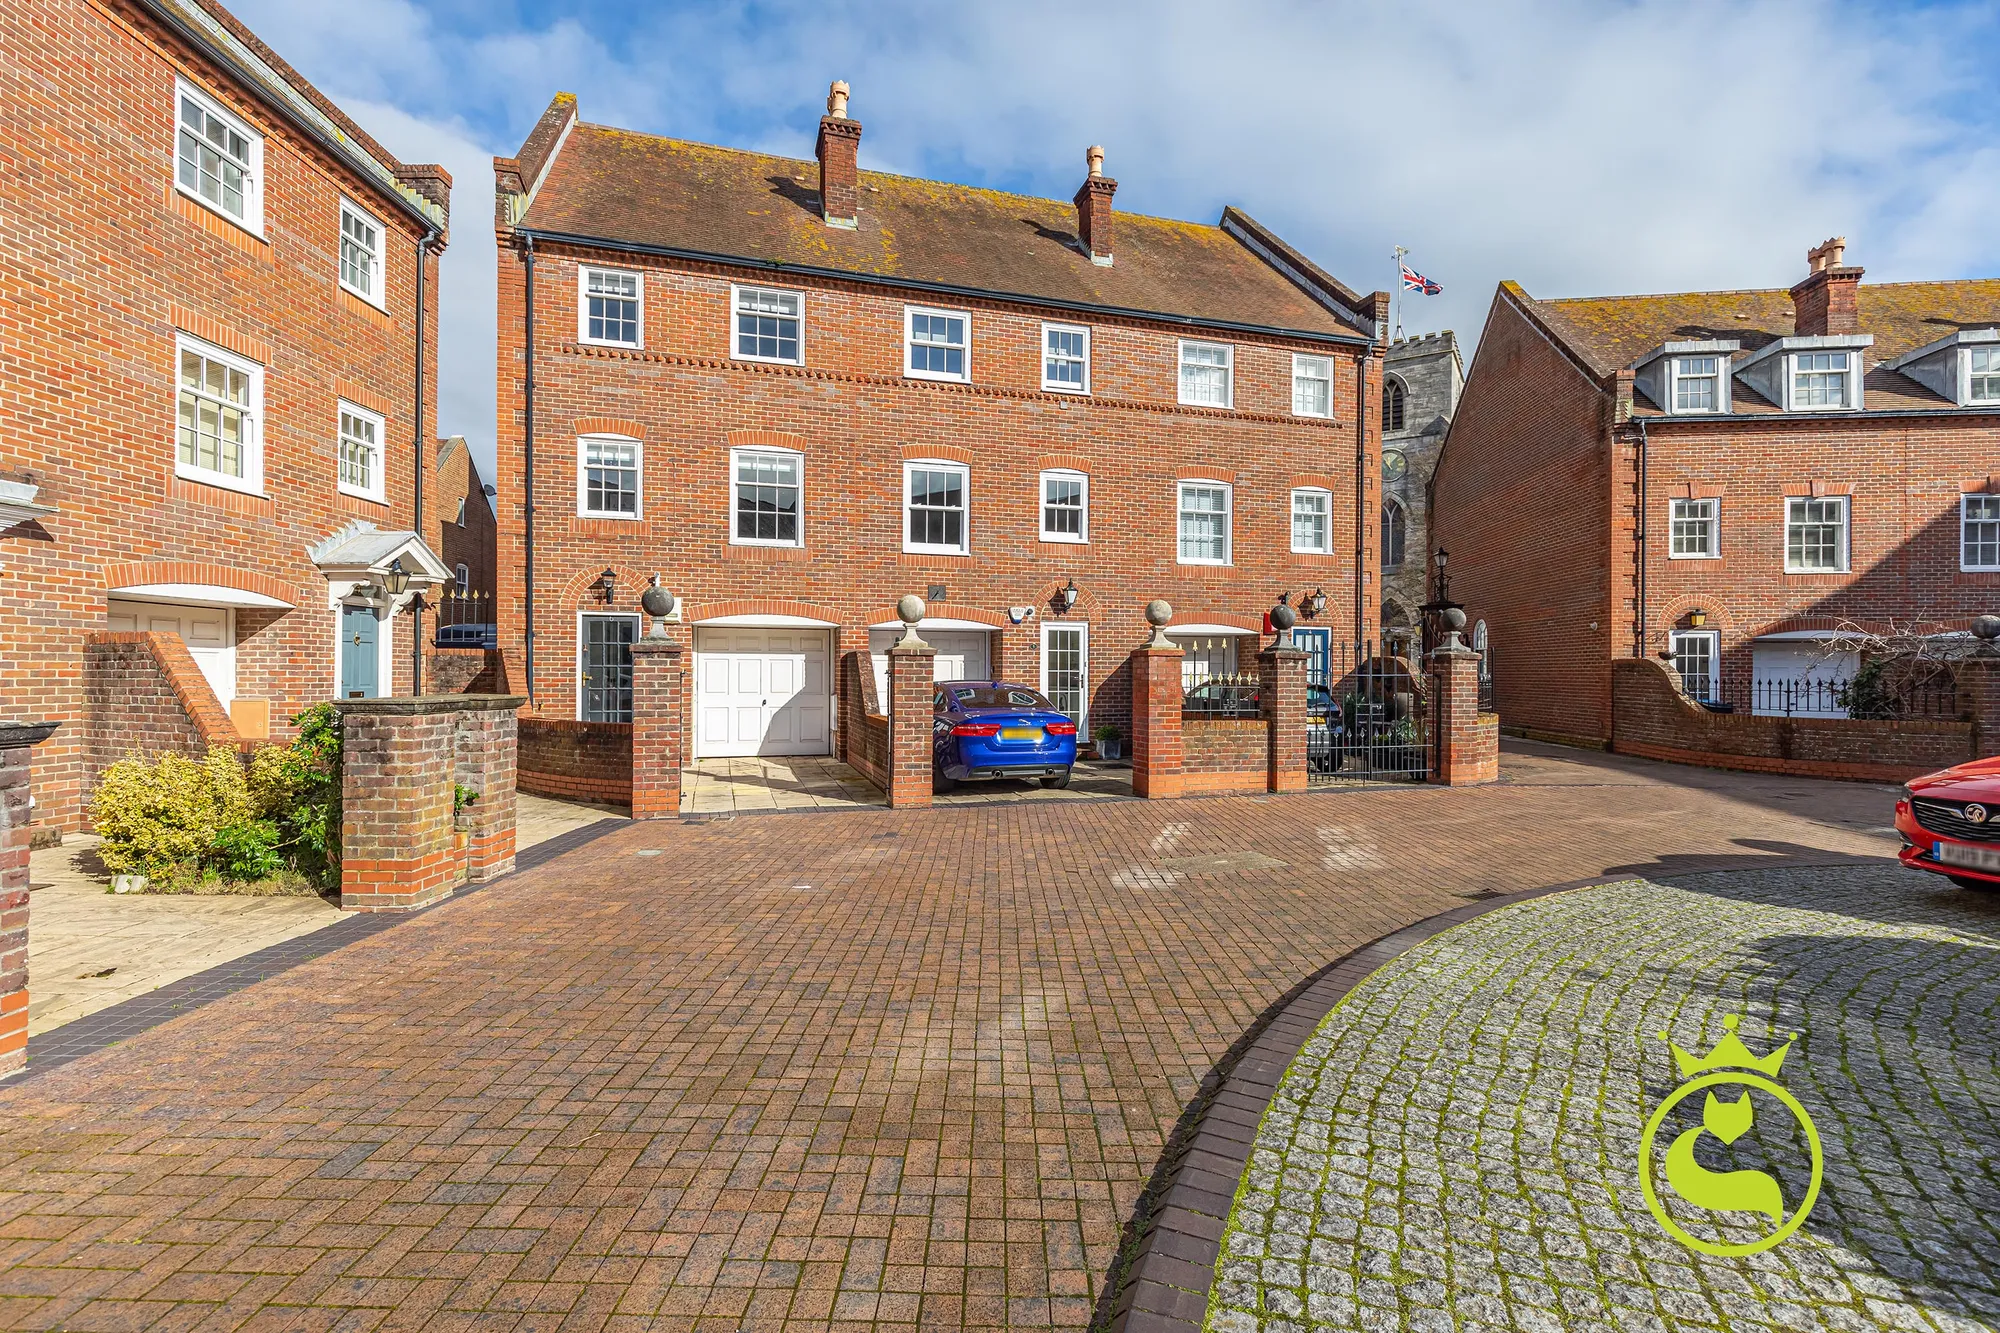 5 bed terraced house for sale in Barbers Gate, Poole - Property Image 1